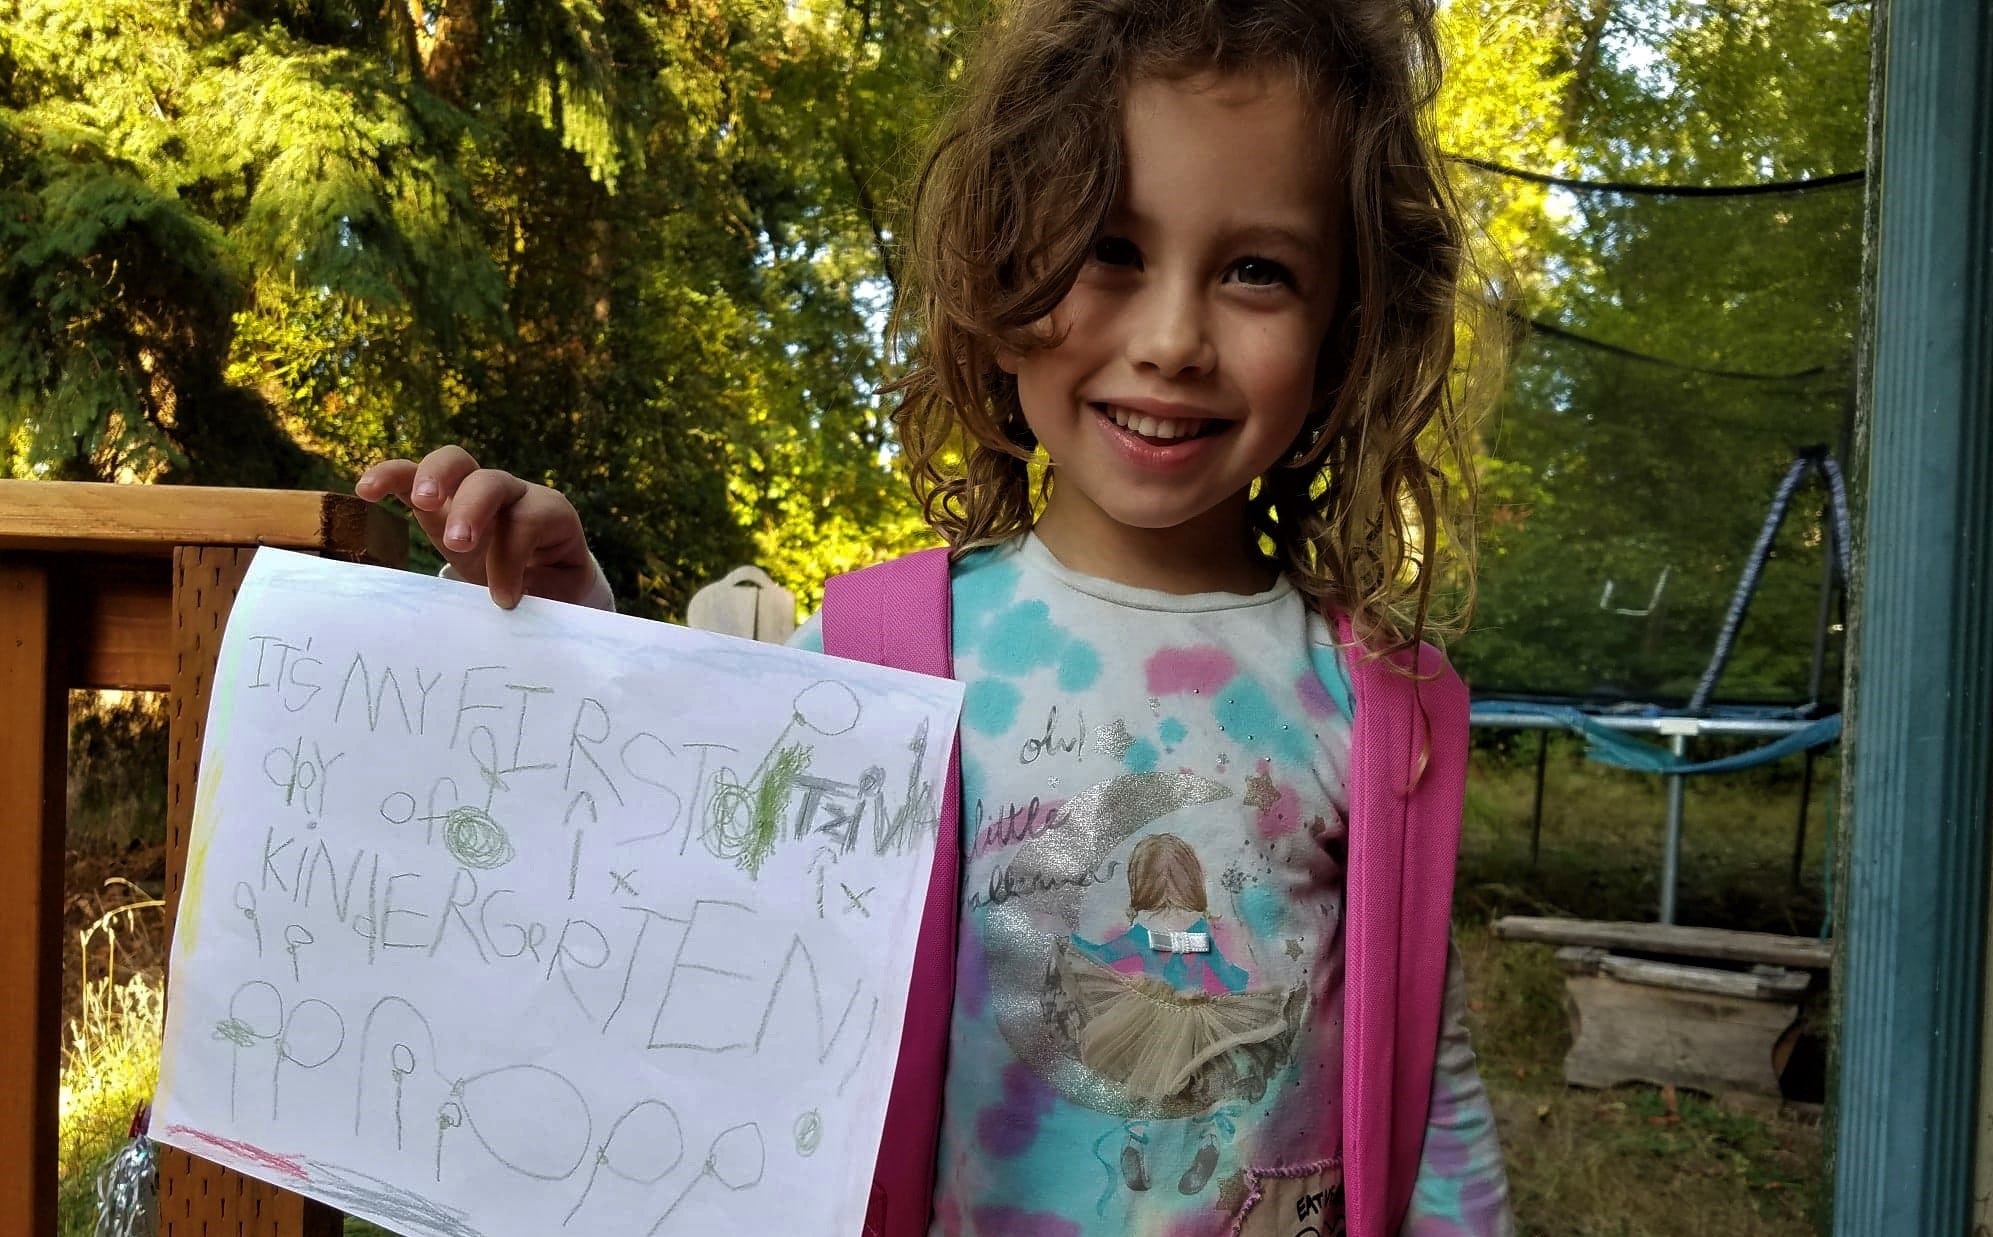 Smiling 5-year-old in a tie-dye shirt and backpack holds a hand-drawn sign that says, “It’s my first day of kindergarten!”